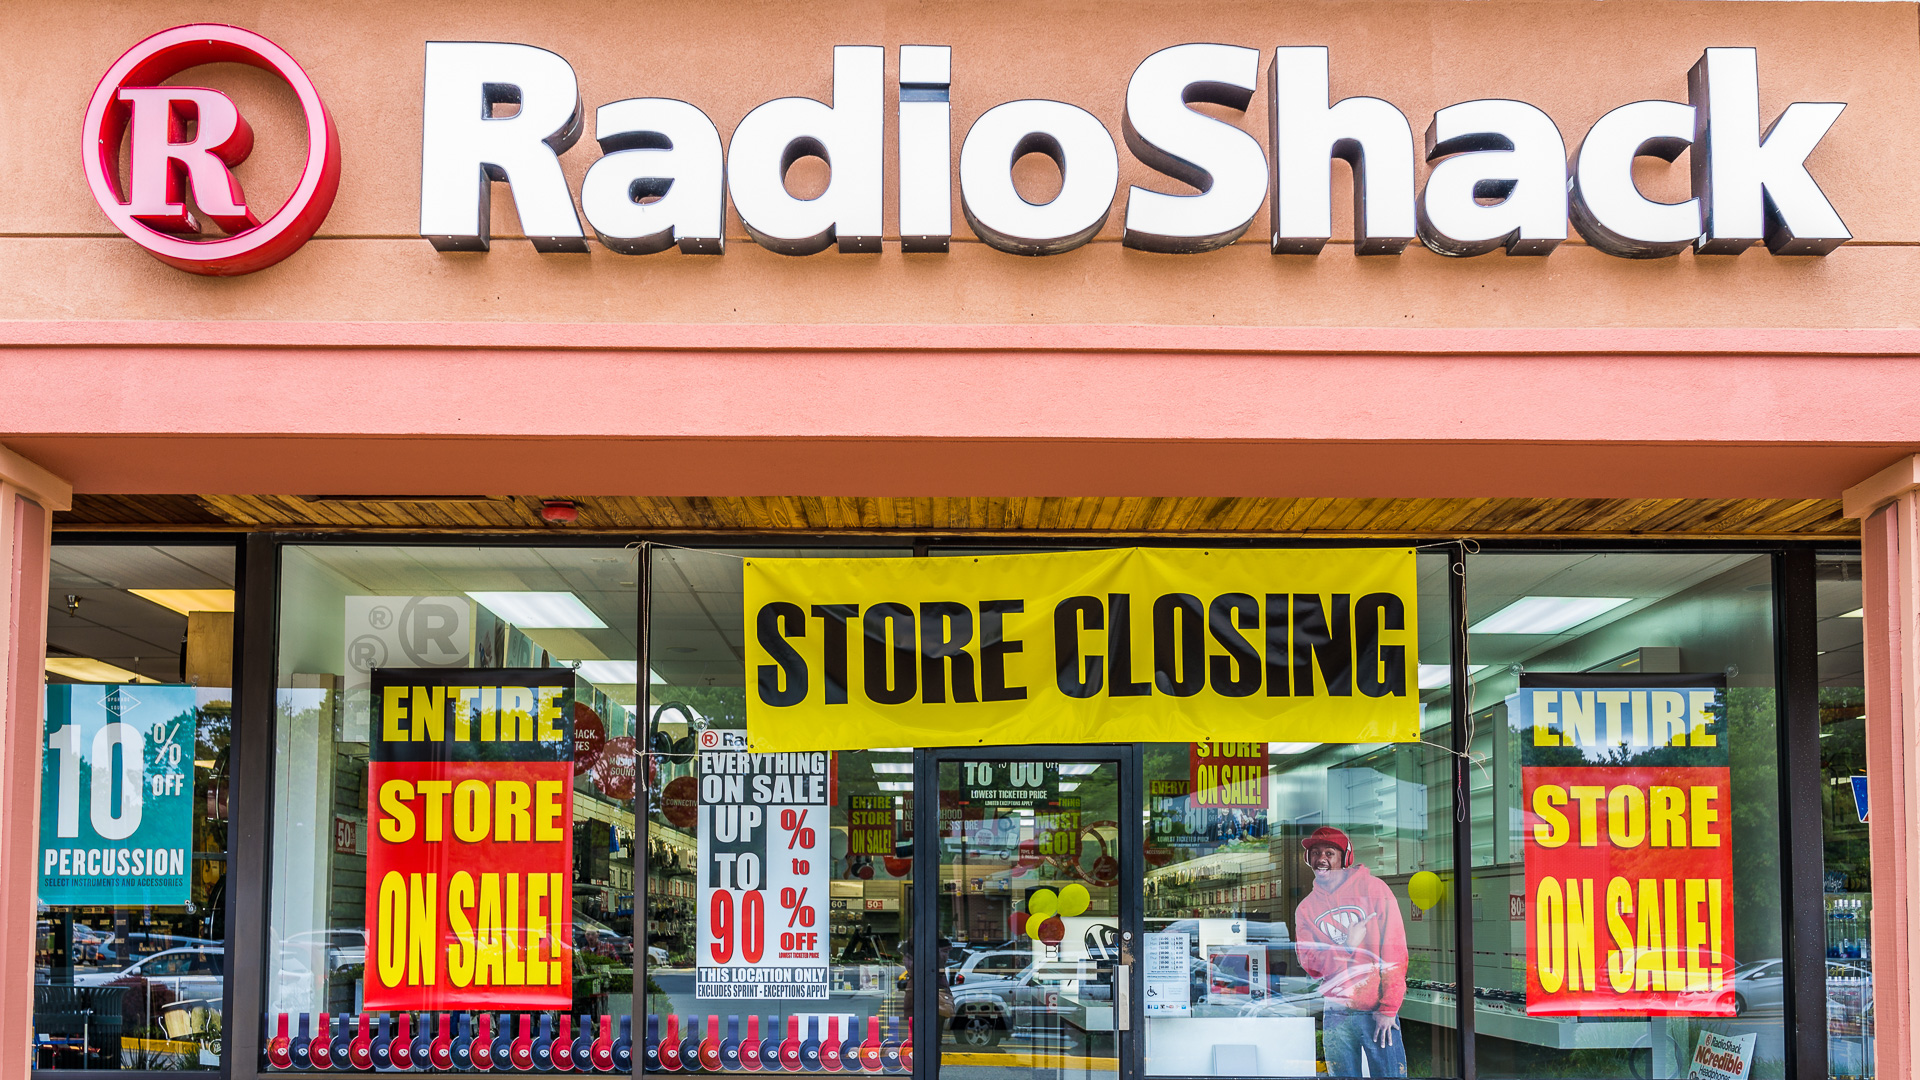 15 of Your Favorite Companies That Have Gone Out of Business